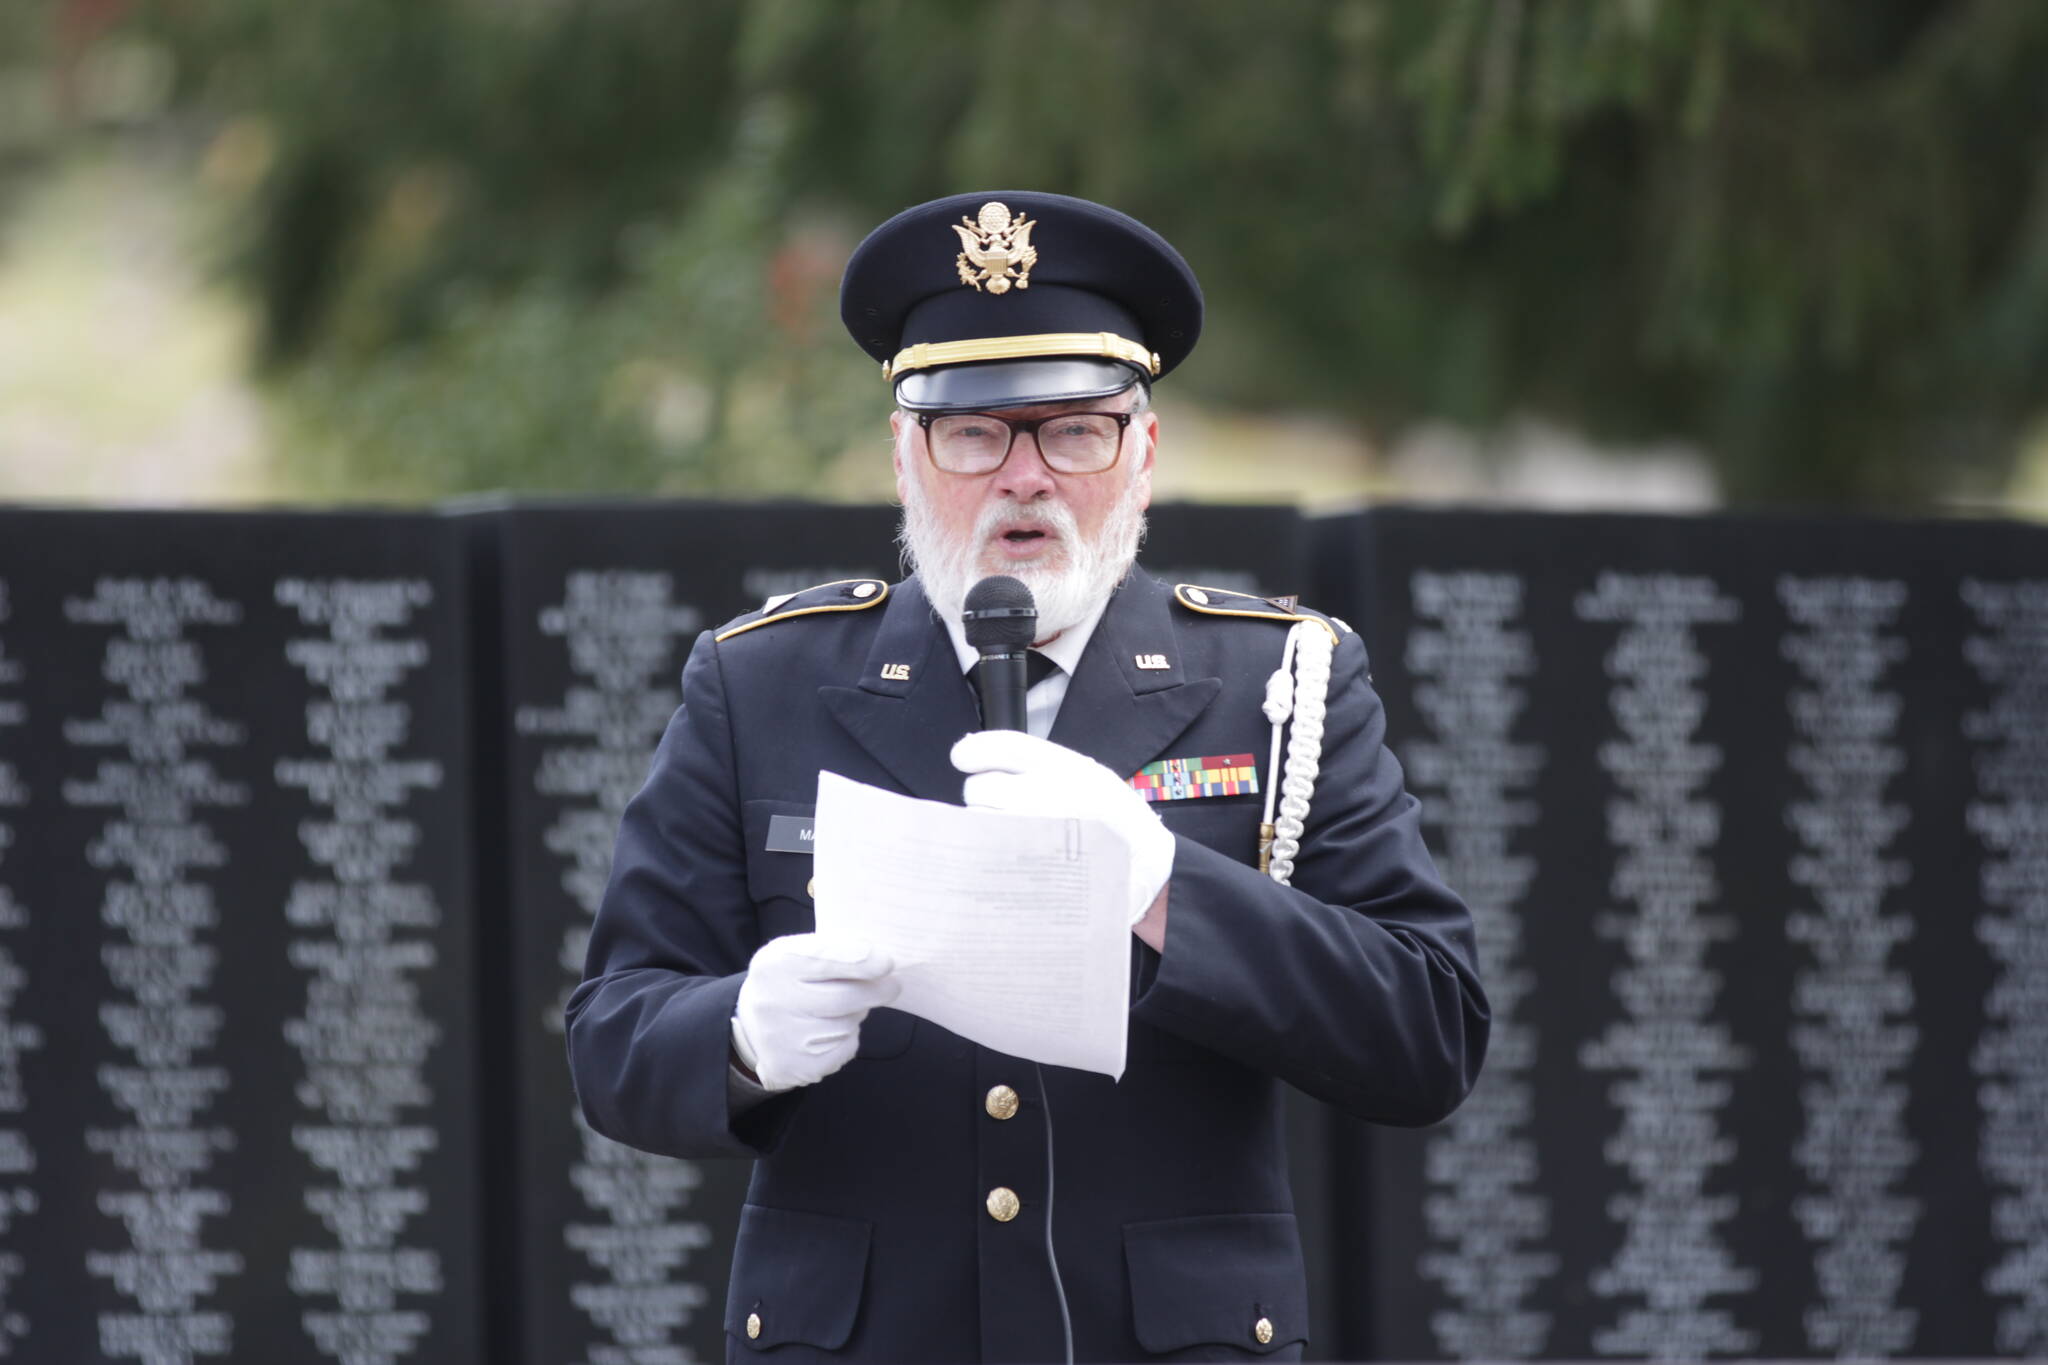 Veterans of Foreign Wars Post 224 post commander Anthony Magri speaks during a Memorial Day Ceremony at Fern Hill Cemetery on May 29. (Michael S. Lockett / The Daily World)